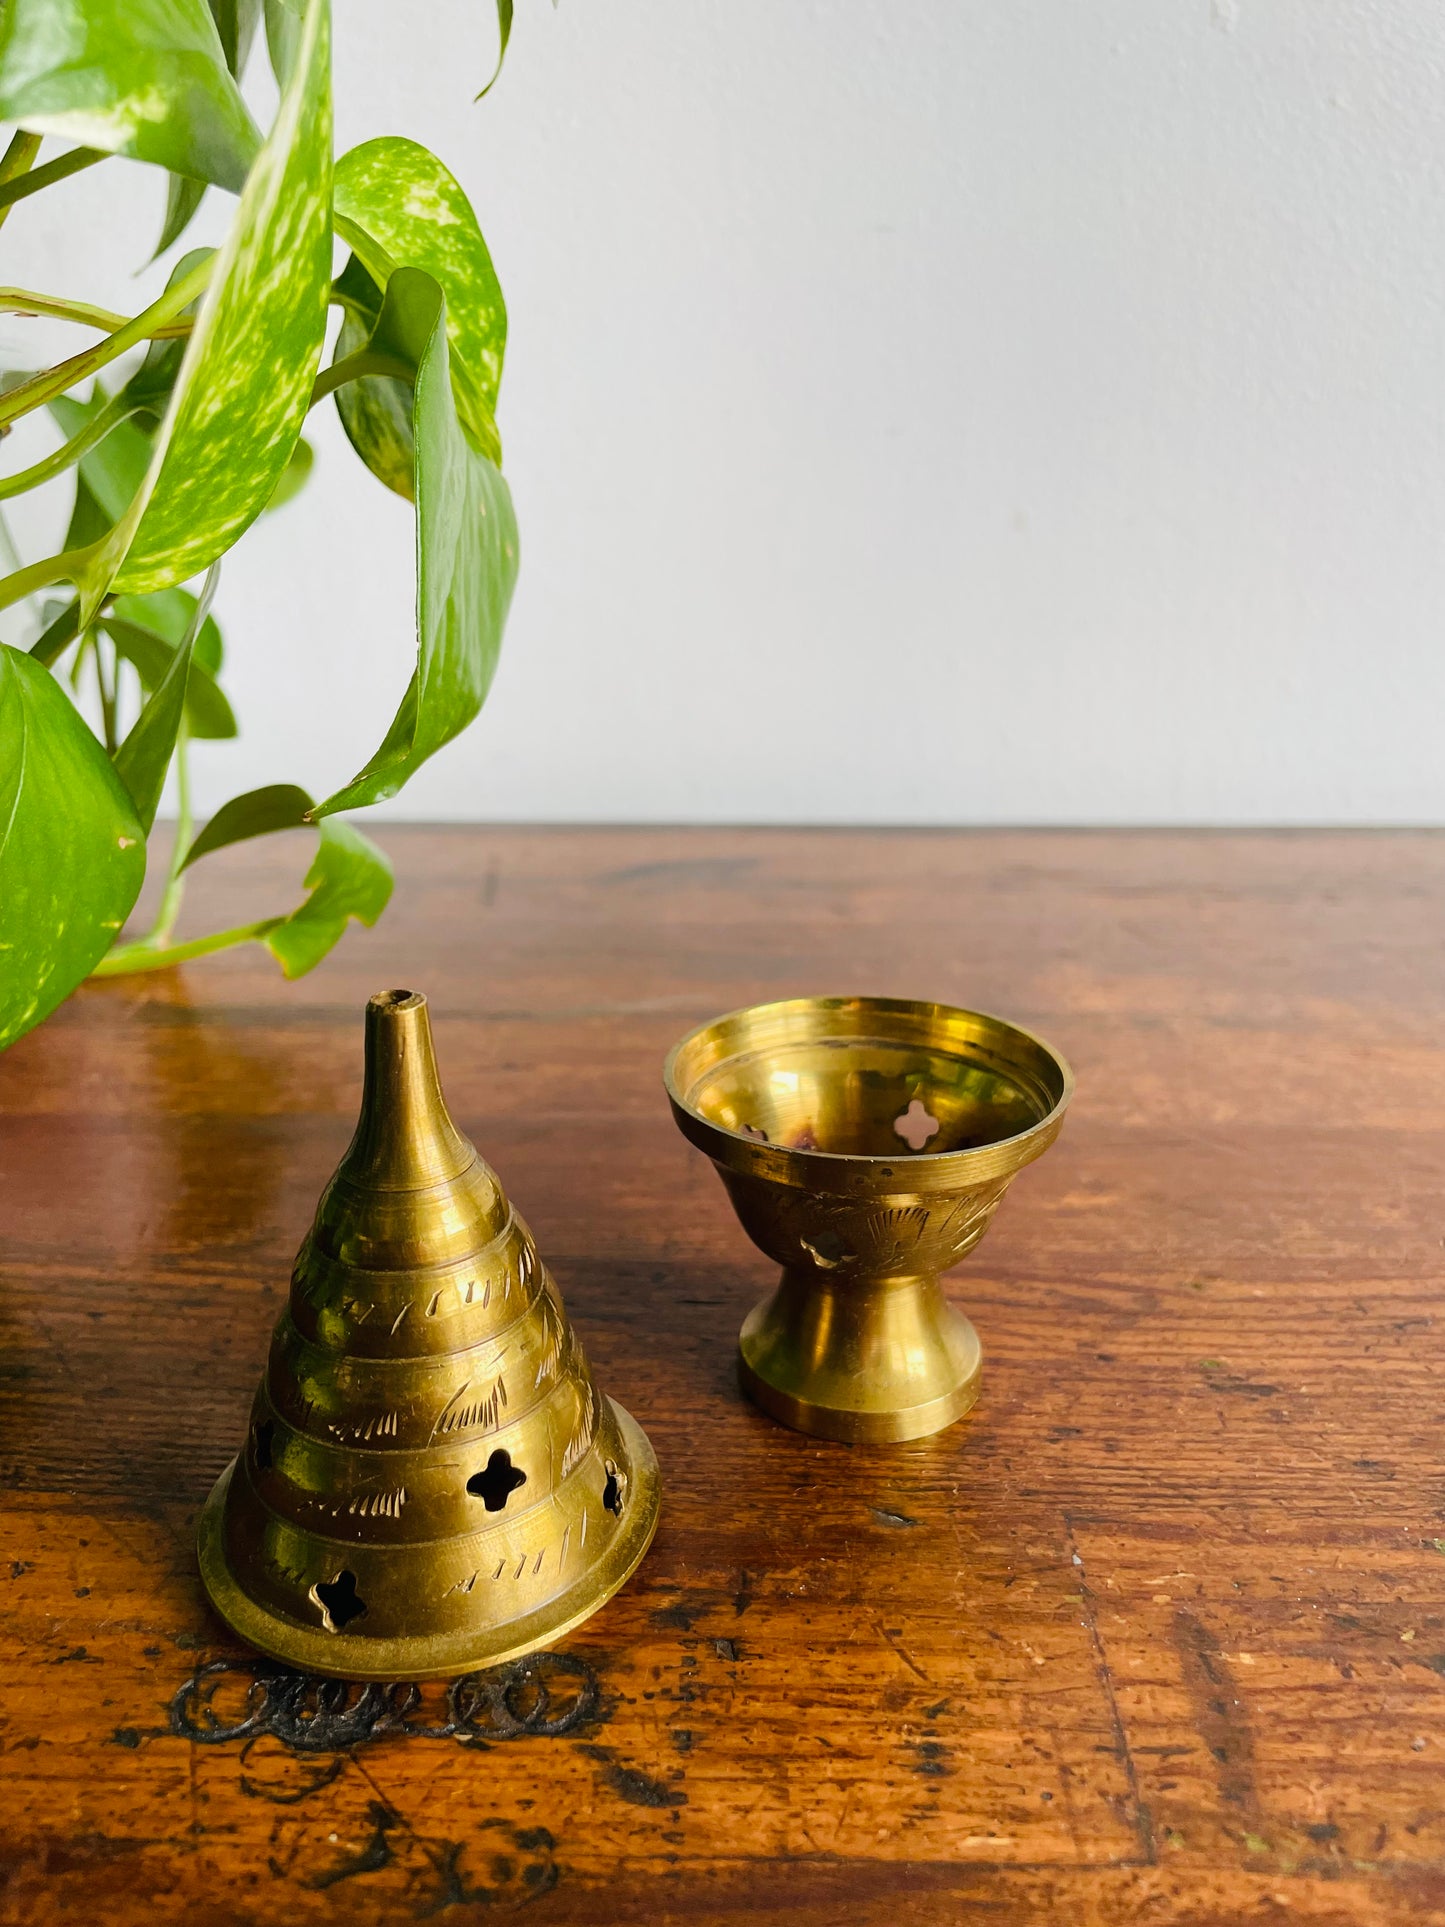 Solid Brass Beehive Shaped Incense Burner with Lid